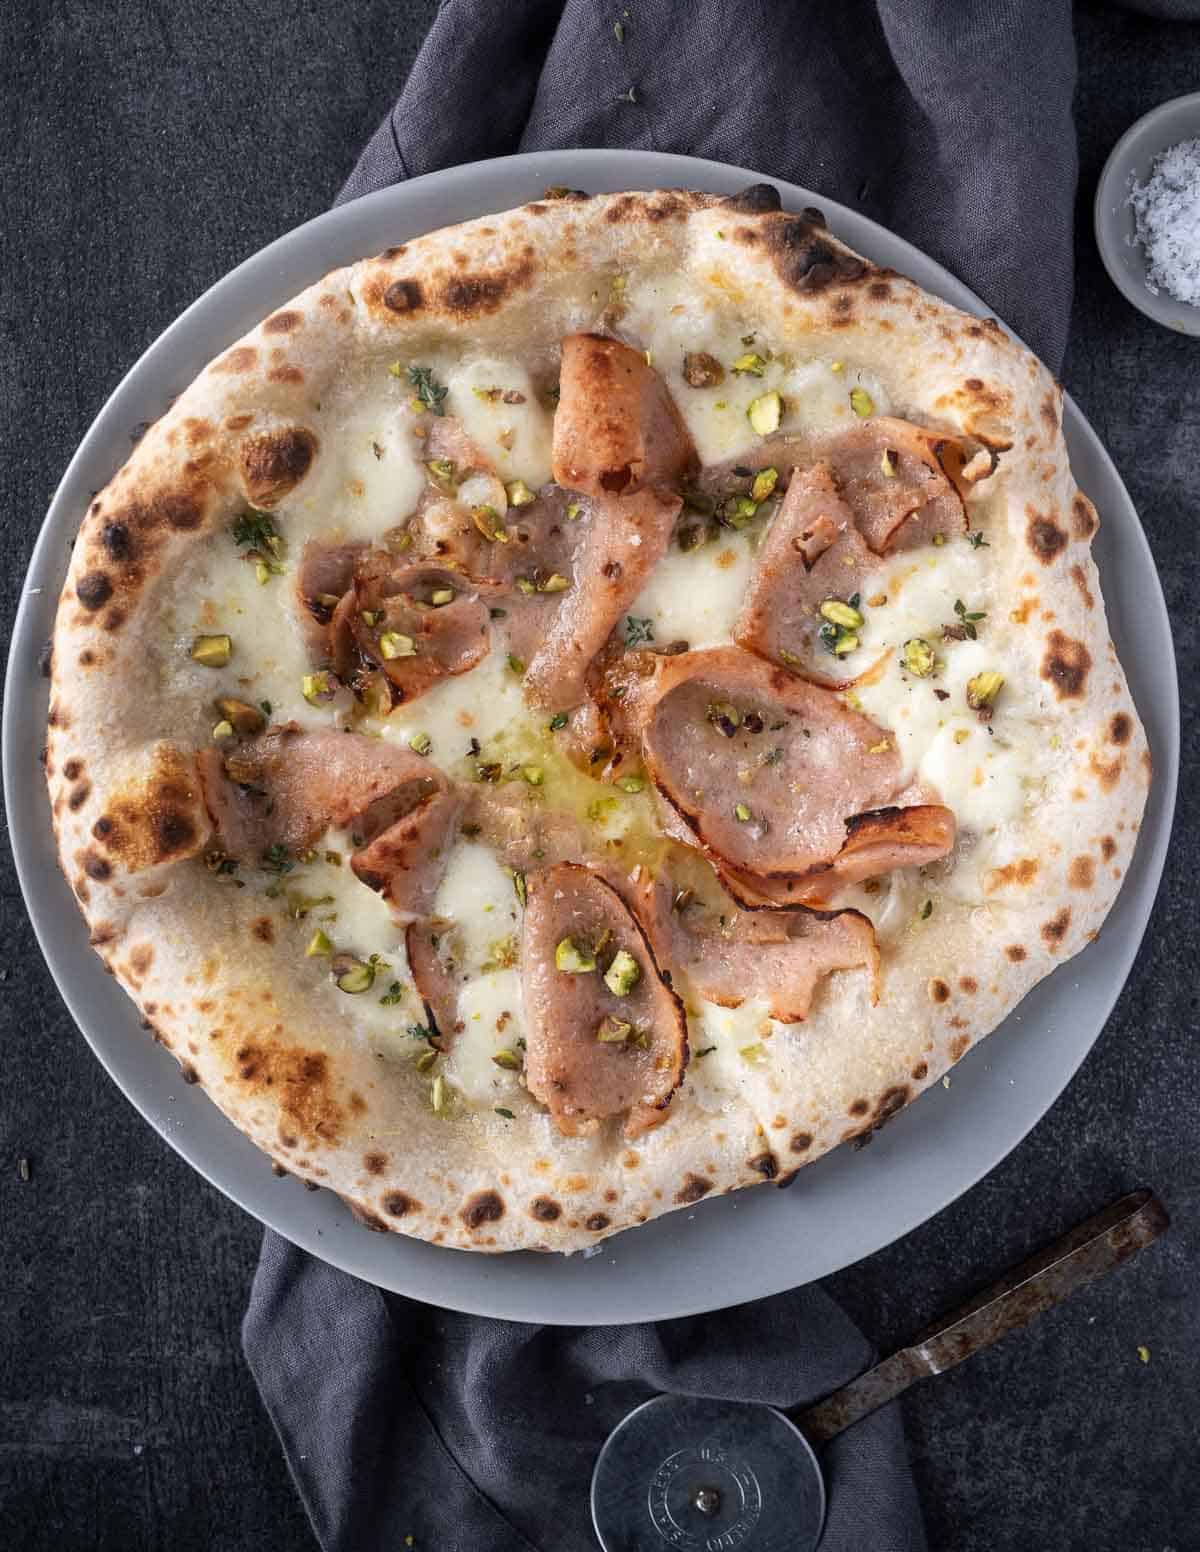 Mortadella pizza topped with pistachios on a serving platter